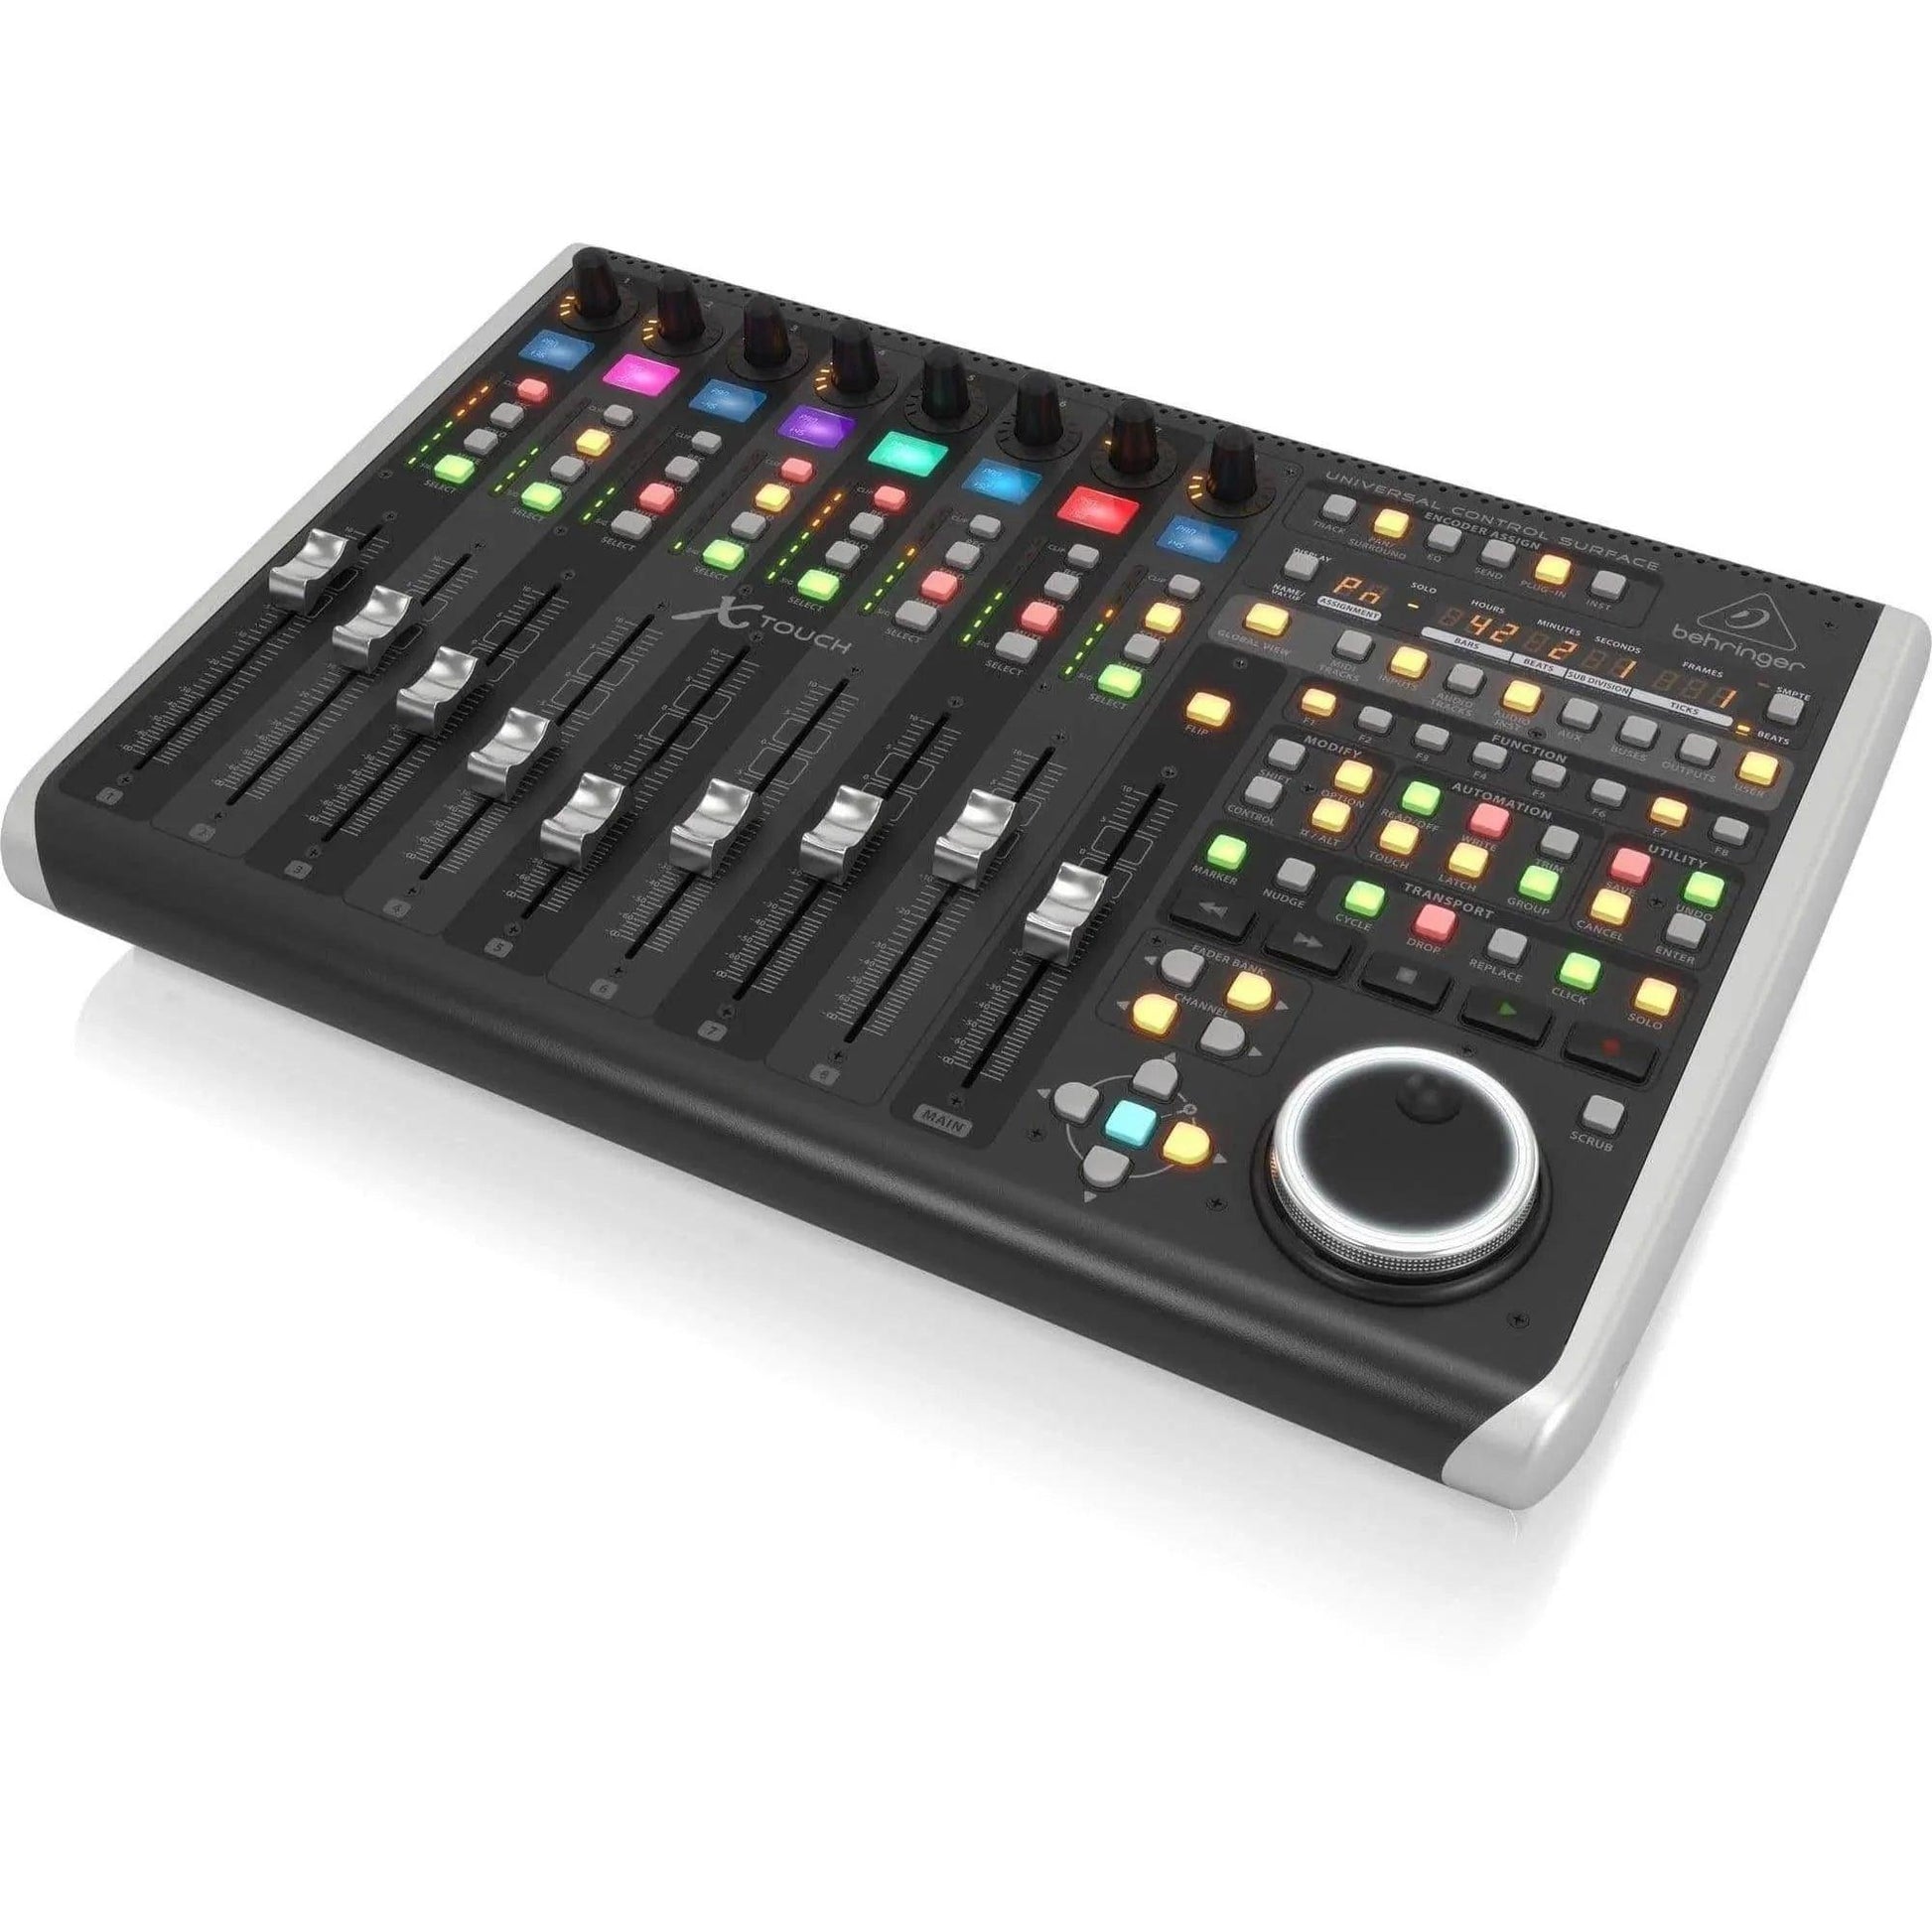 Behringer X-TOUCH Universal Control Surface